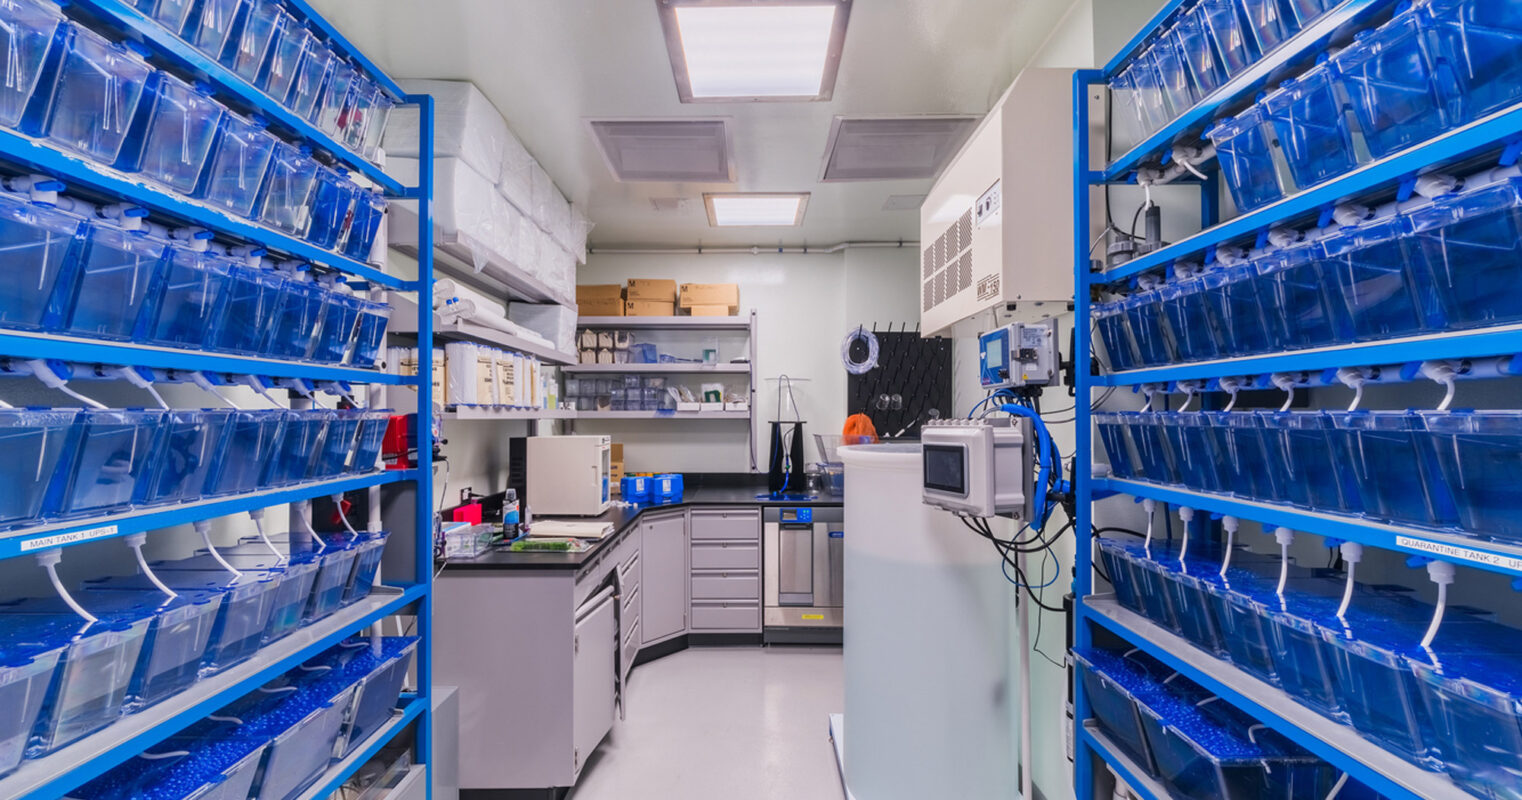 A meticulously organized laboratory interior with vibrant blue storage bins on steel shelving units, durable epoxy resin countertops, and state-of-the-art equipment ensuring a sterile and efficient research environment.